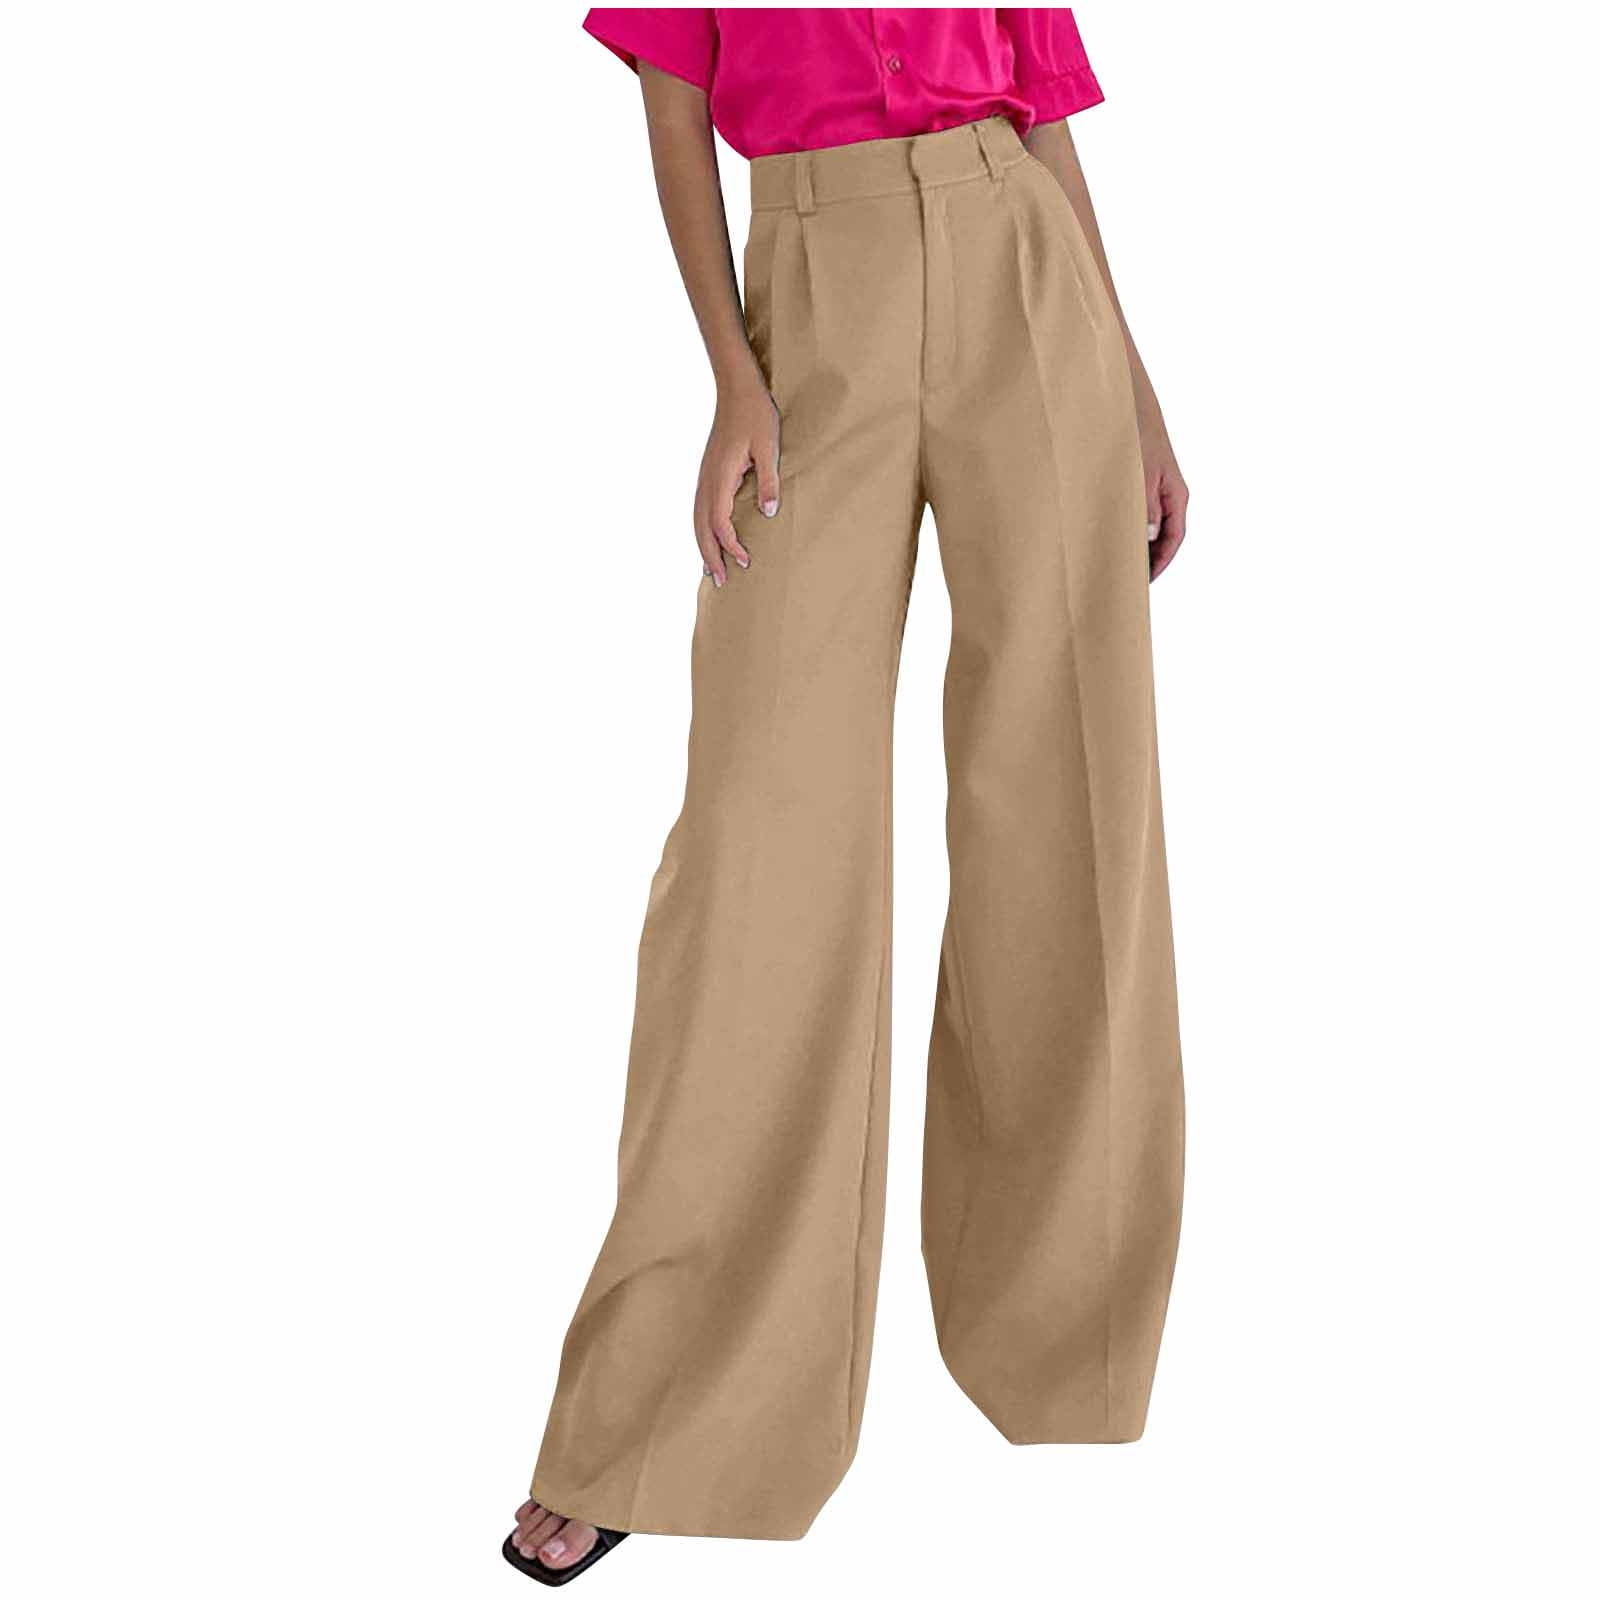 YWDJ High Waisted Wide Leg Pants for Women Casual Women Casual Autumn Straight  Solid Color High Waist Suit Pants With Pocket Purple L 